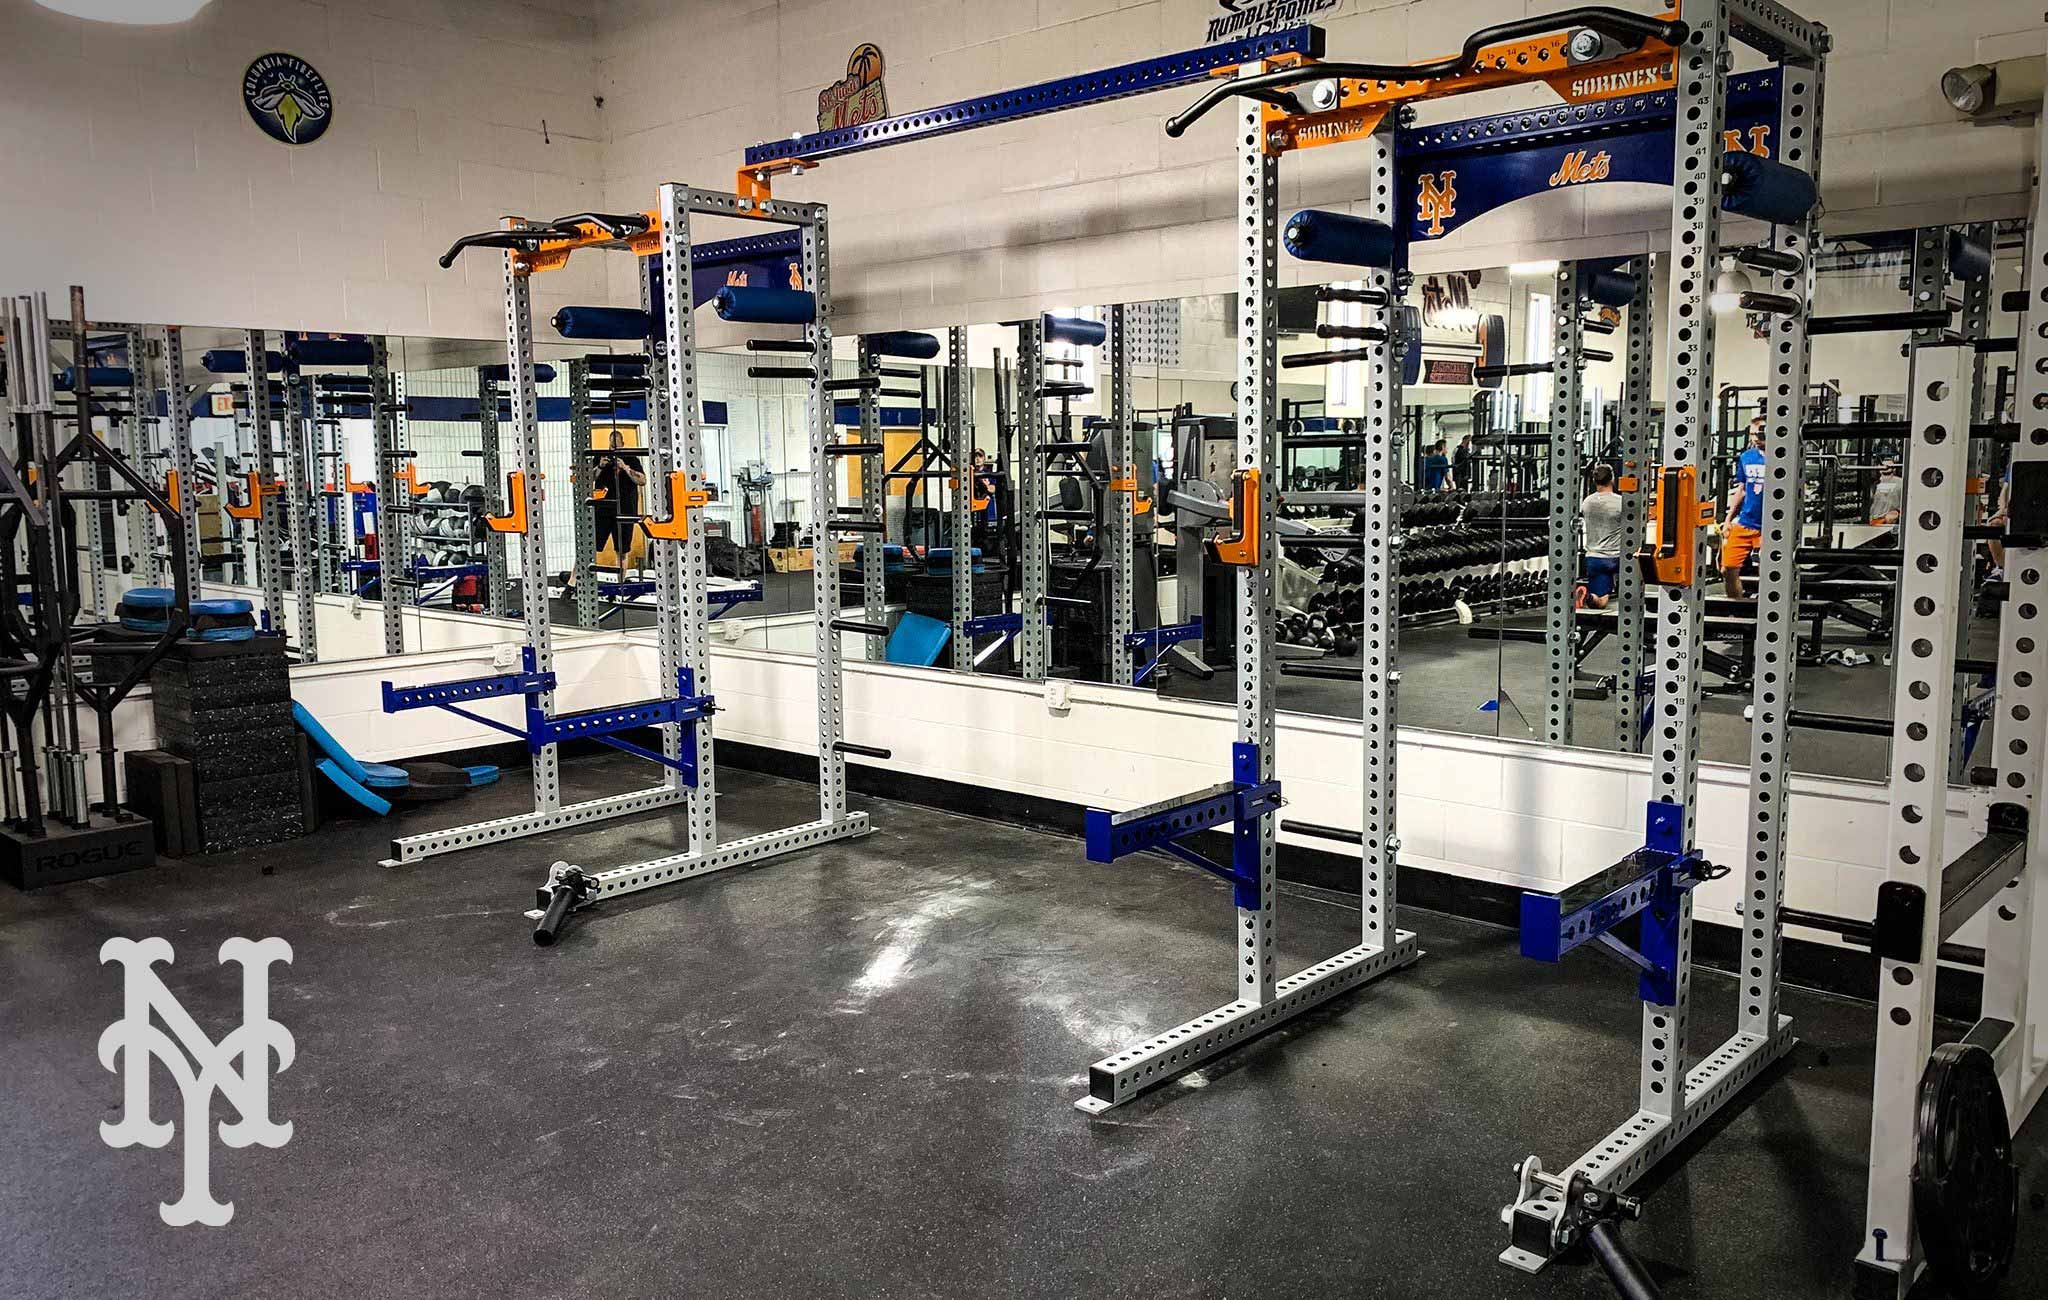 New York Mets Sorinex strength and conditioning facility